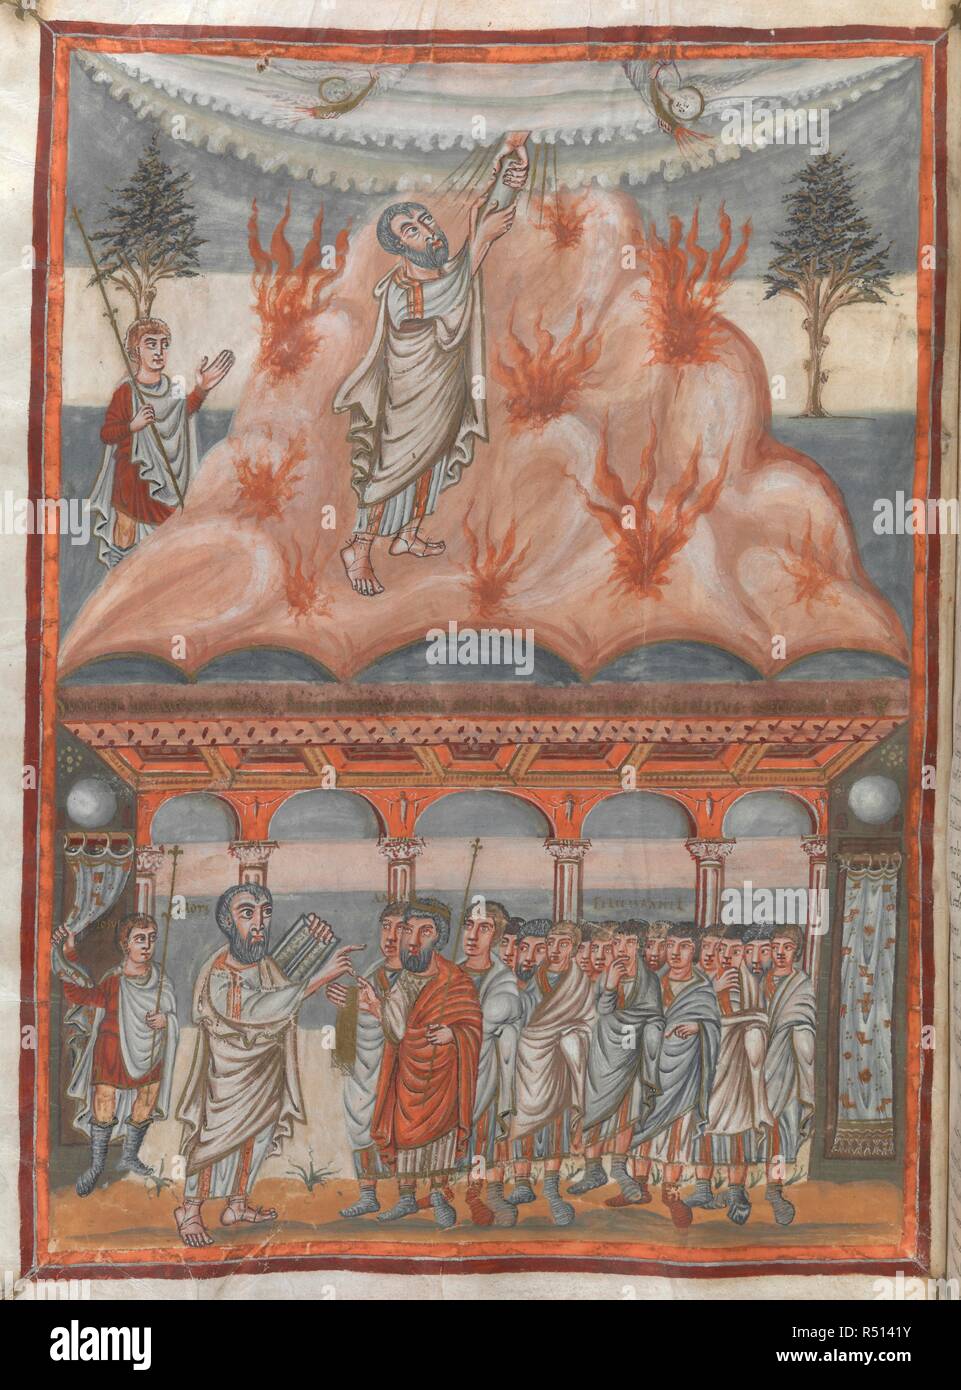 Miniature in two registers: Moses receiving the tablets of law; Moses addressing Aaron and the Israelites (Exodus). Moutier-Grandval Bible. Tours [St Martin]; circa 834-843. Source: Add. 10546, f.25v. Language: Latin. Author: ANON. Stock Photo